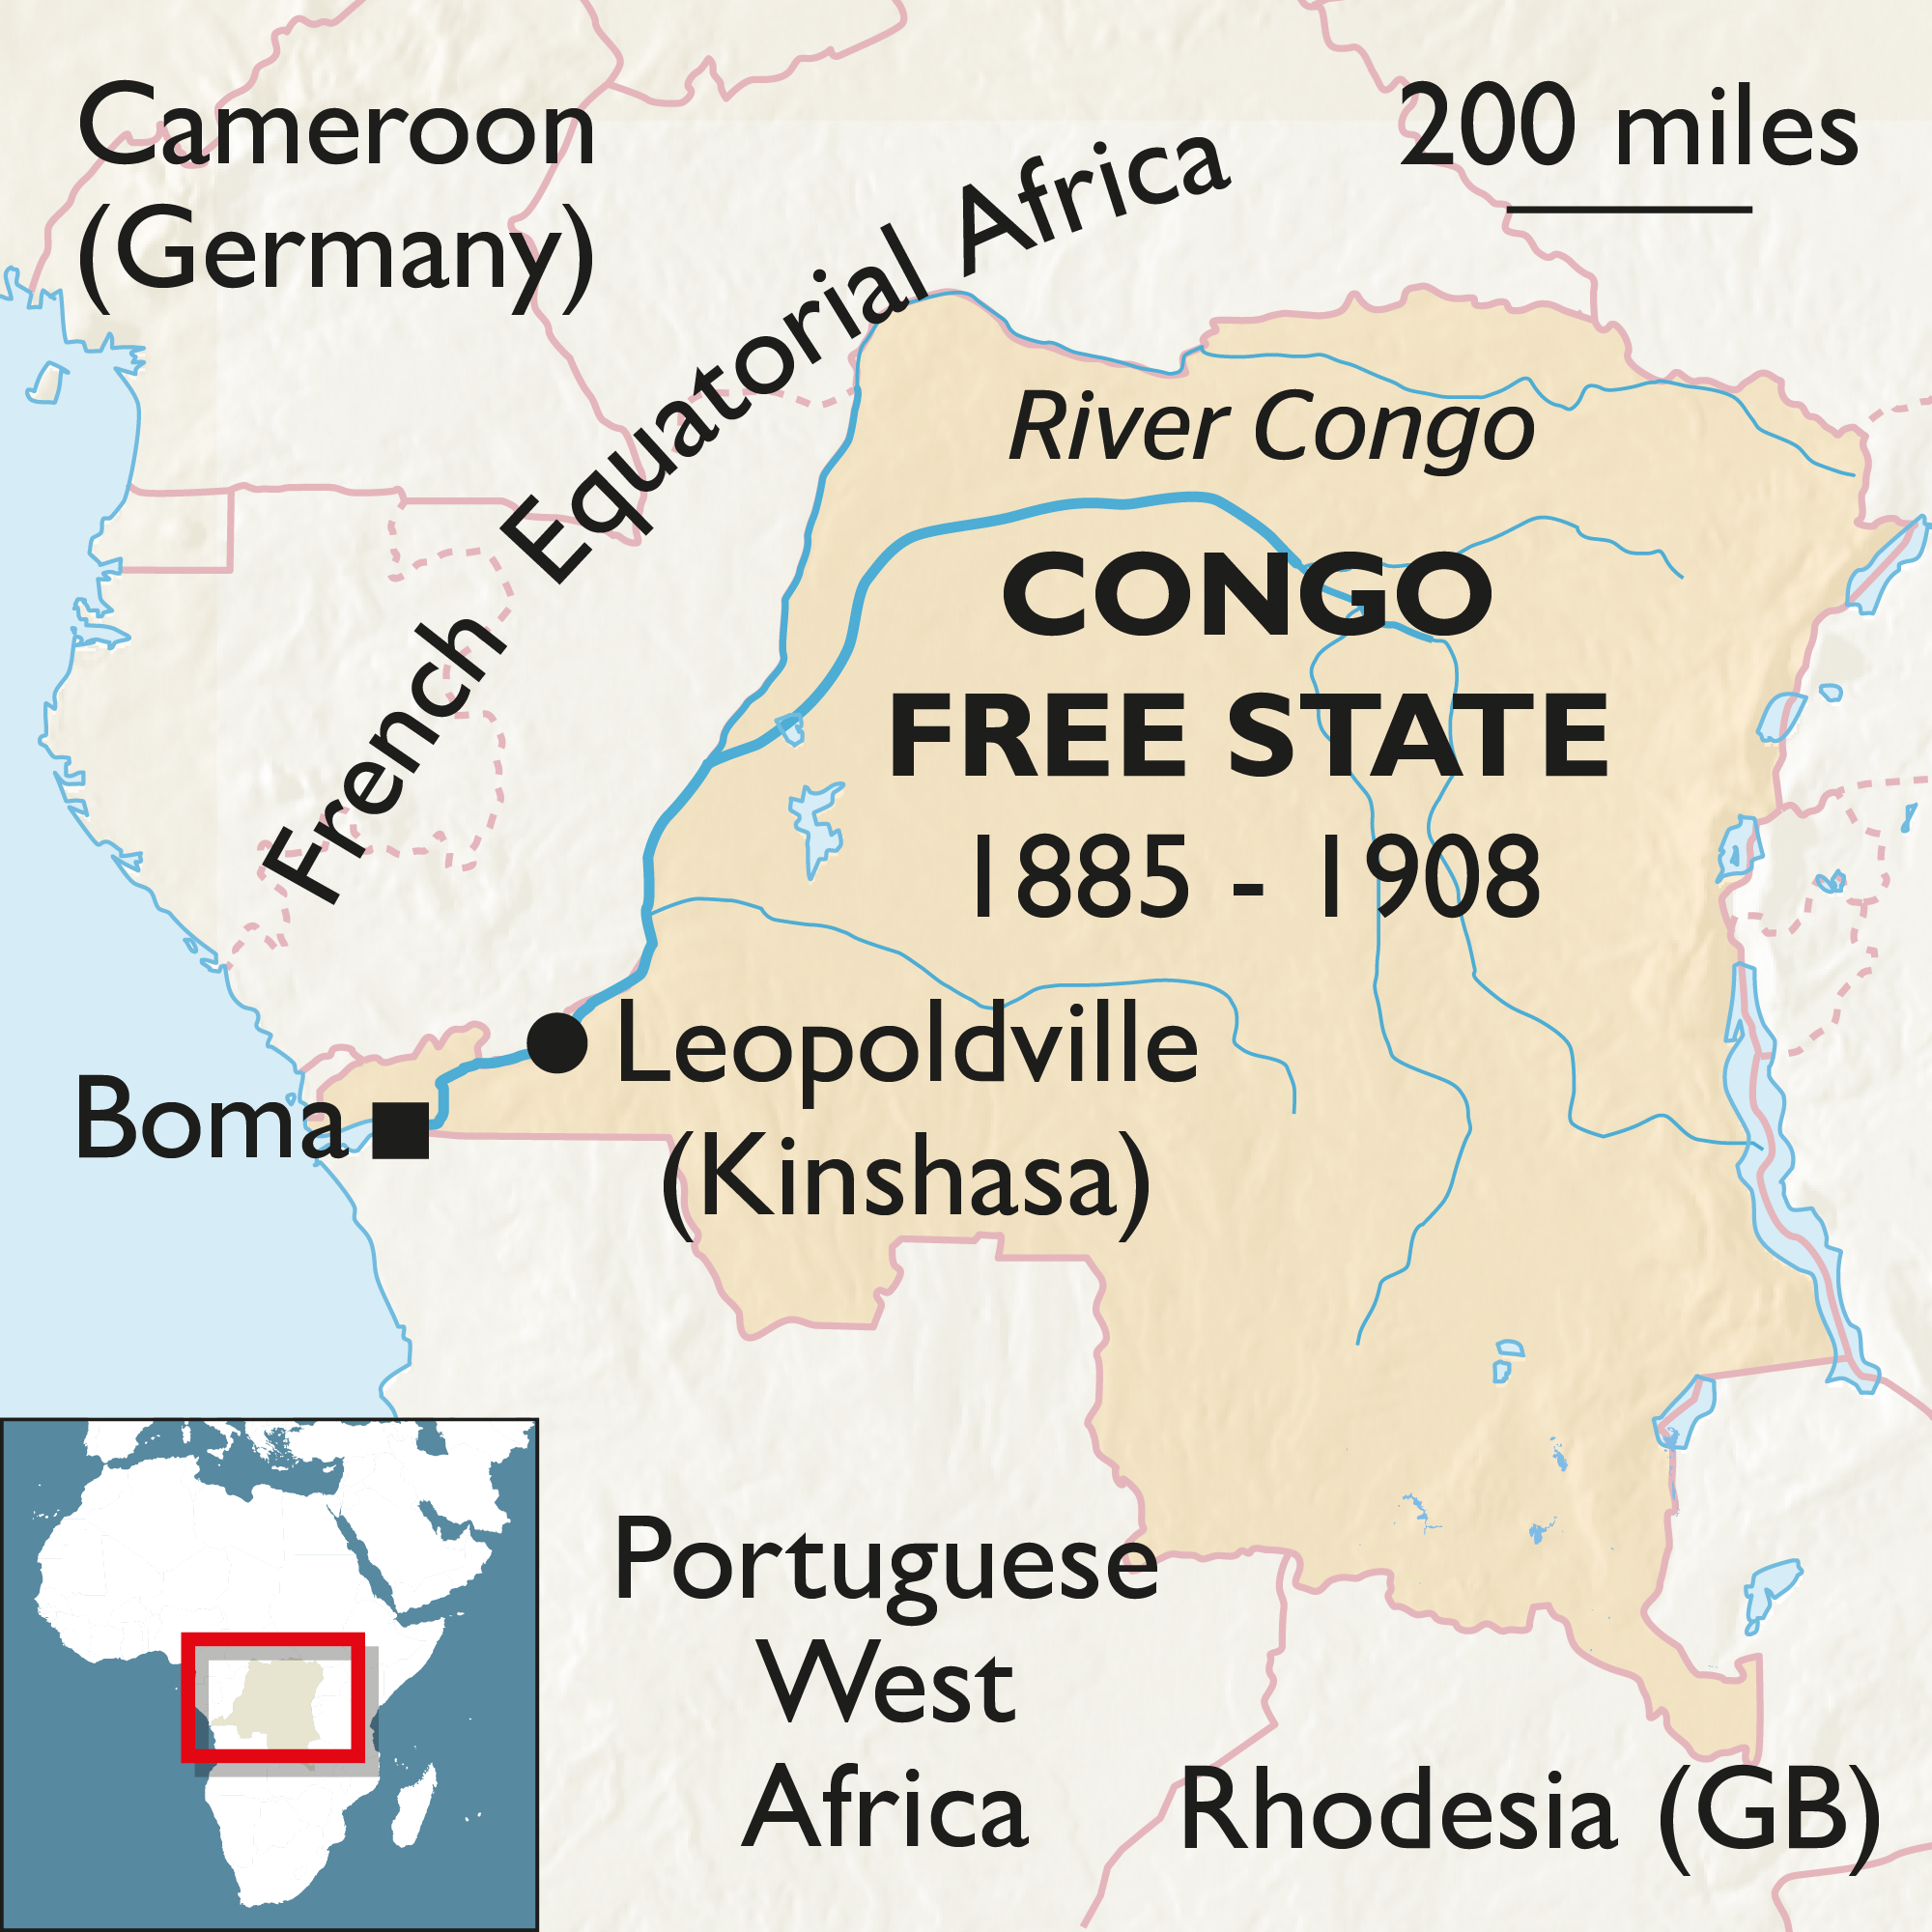 Congo Free State. Source: The Times https://www.thetimes.co.uk/article/king-philippe-of-belgium-apologises-to-congo-for-colonial-atrocities-c3m823b78